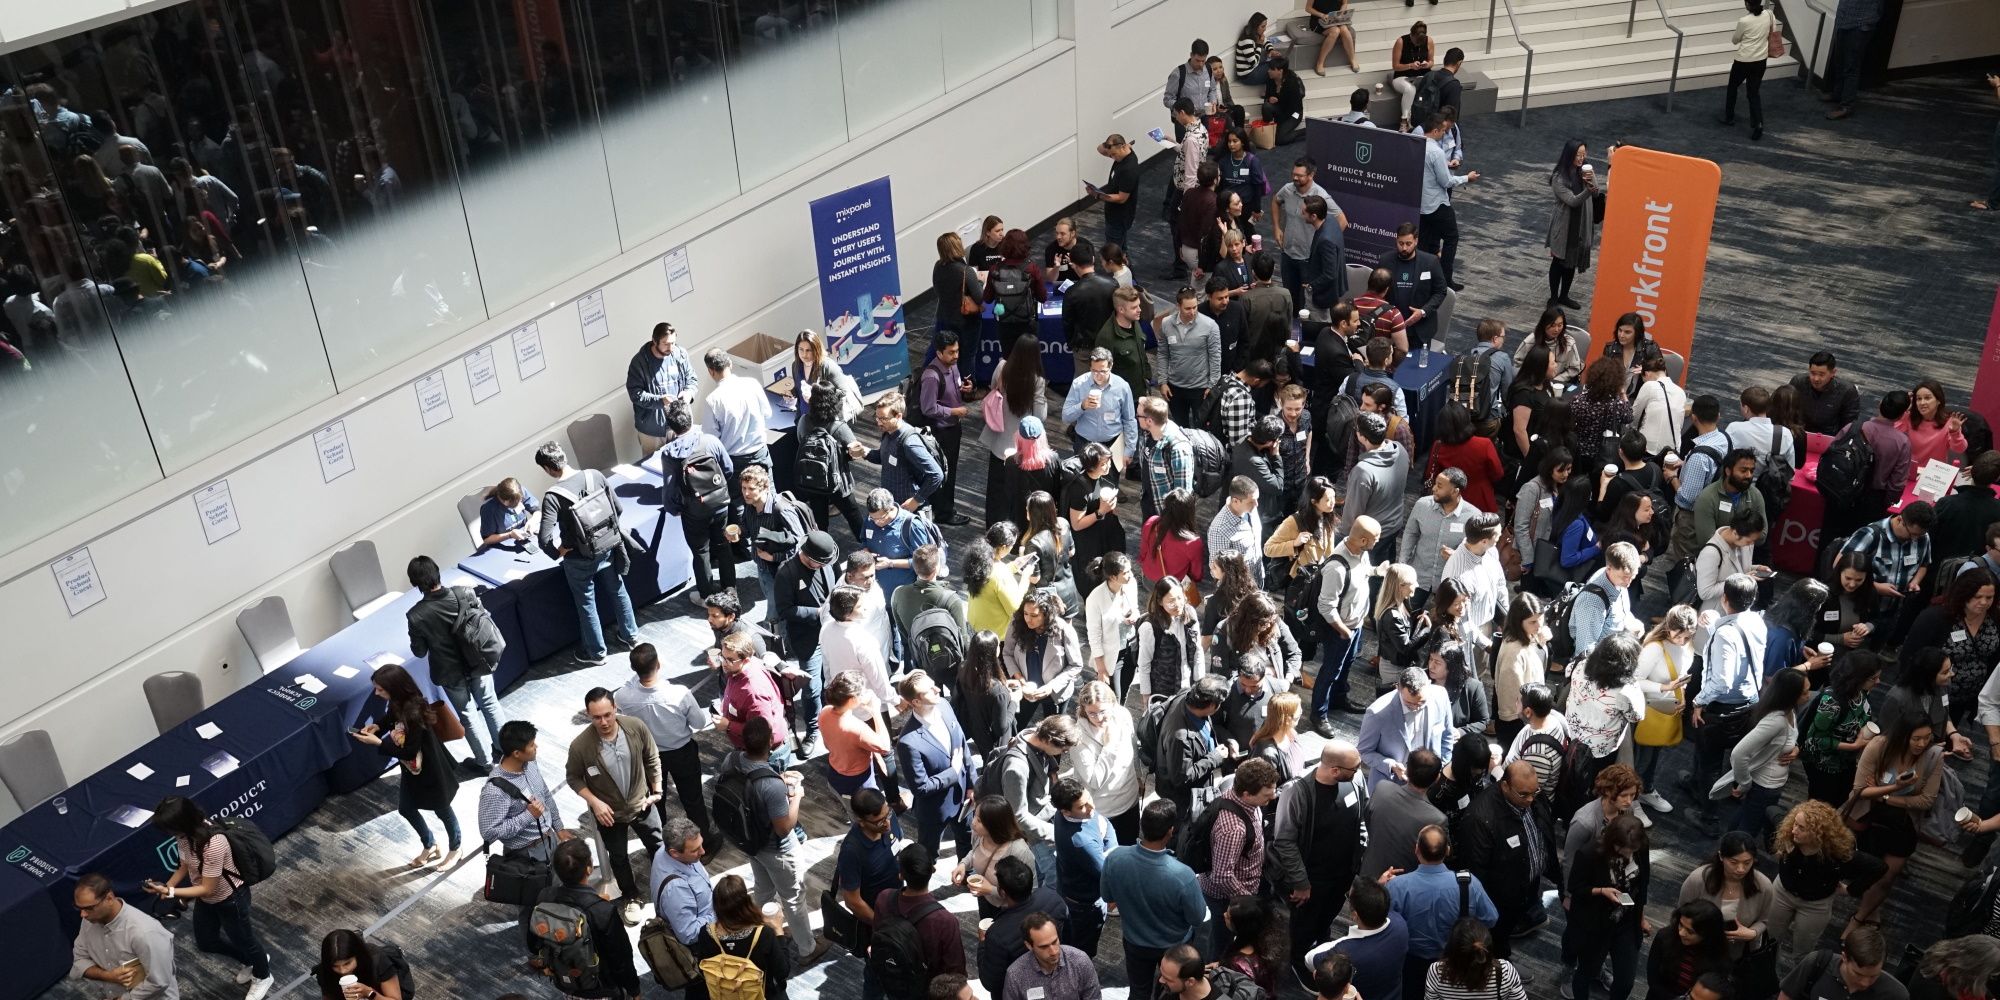 Crowd of people mingling in a conference event